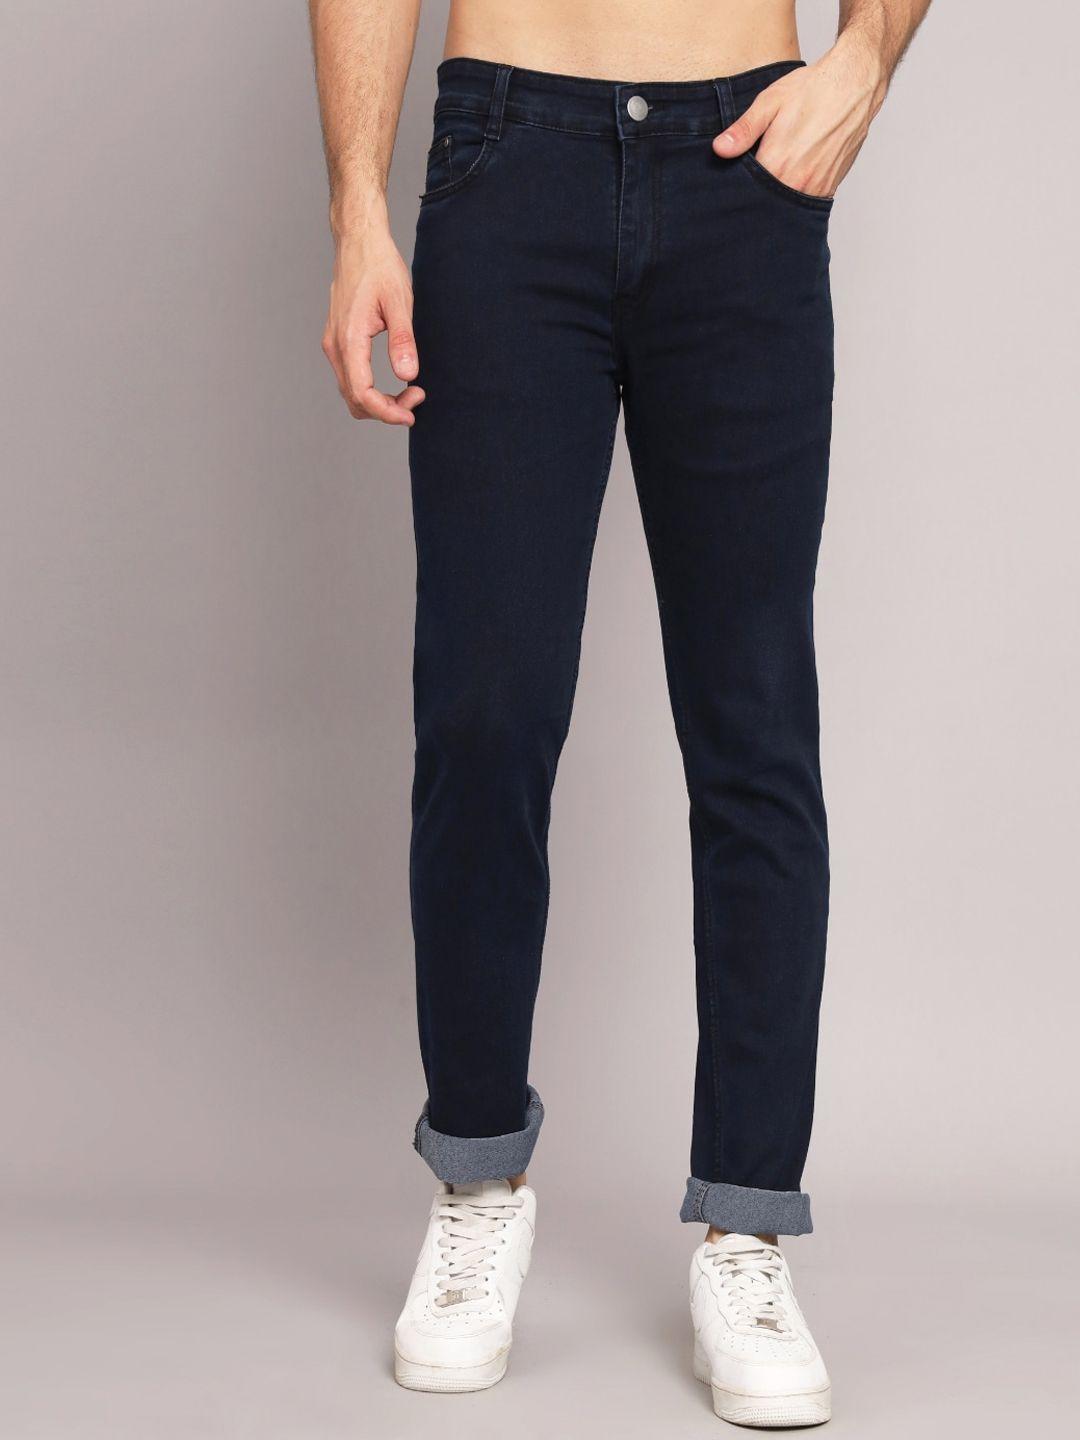 studio nexx men blue relaxed fit stretchable jeans